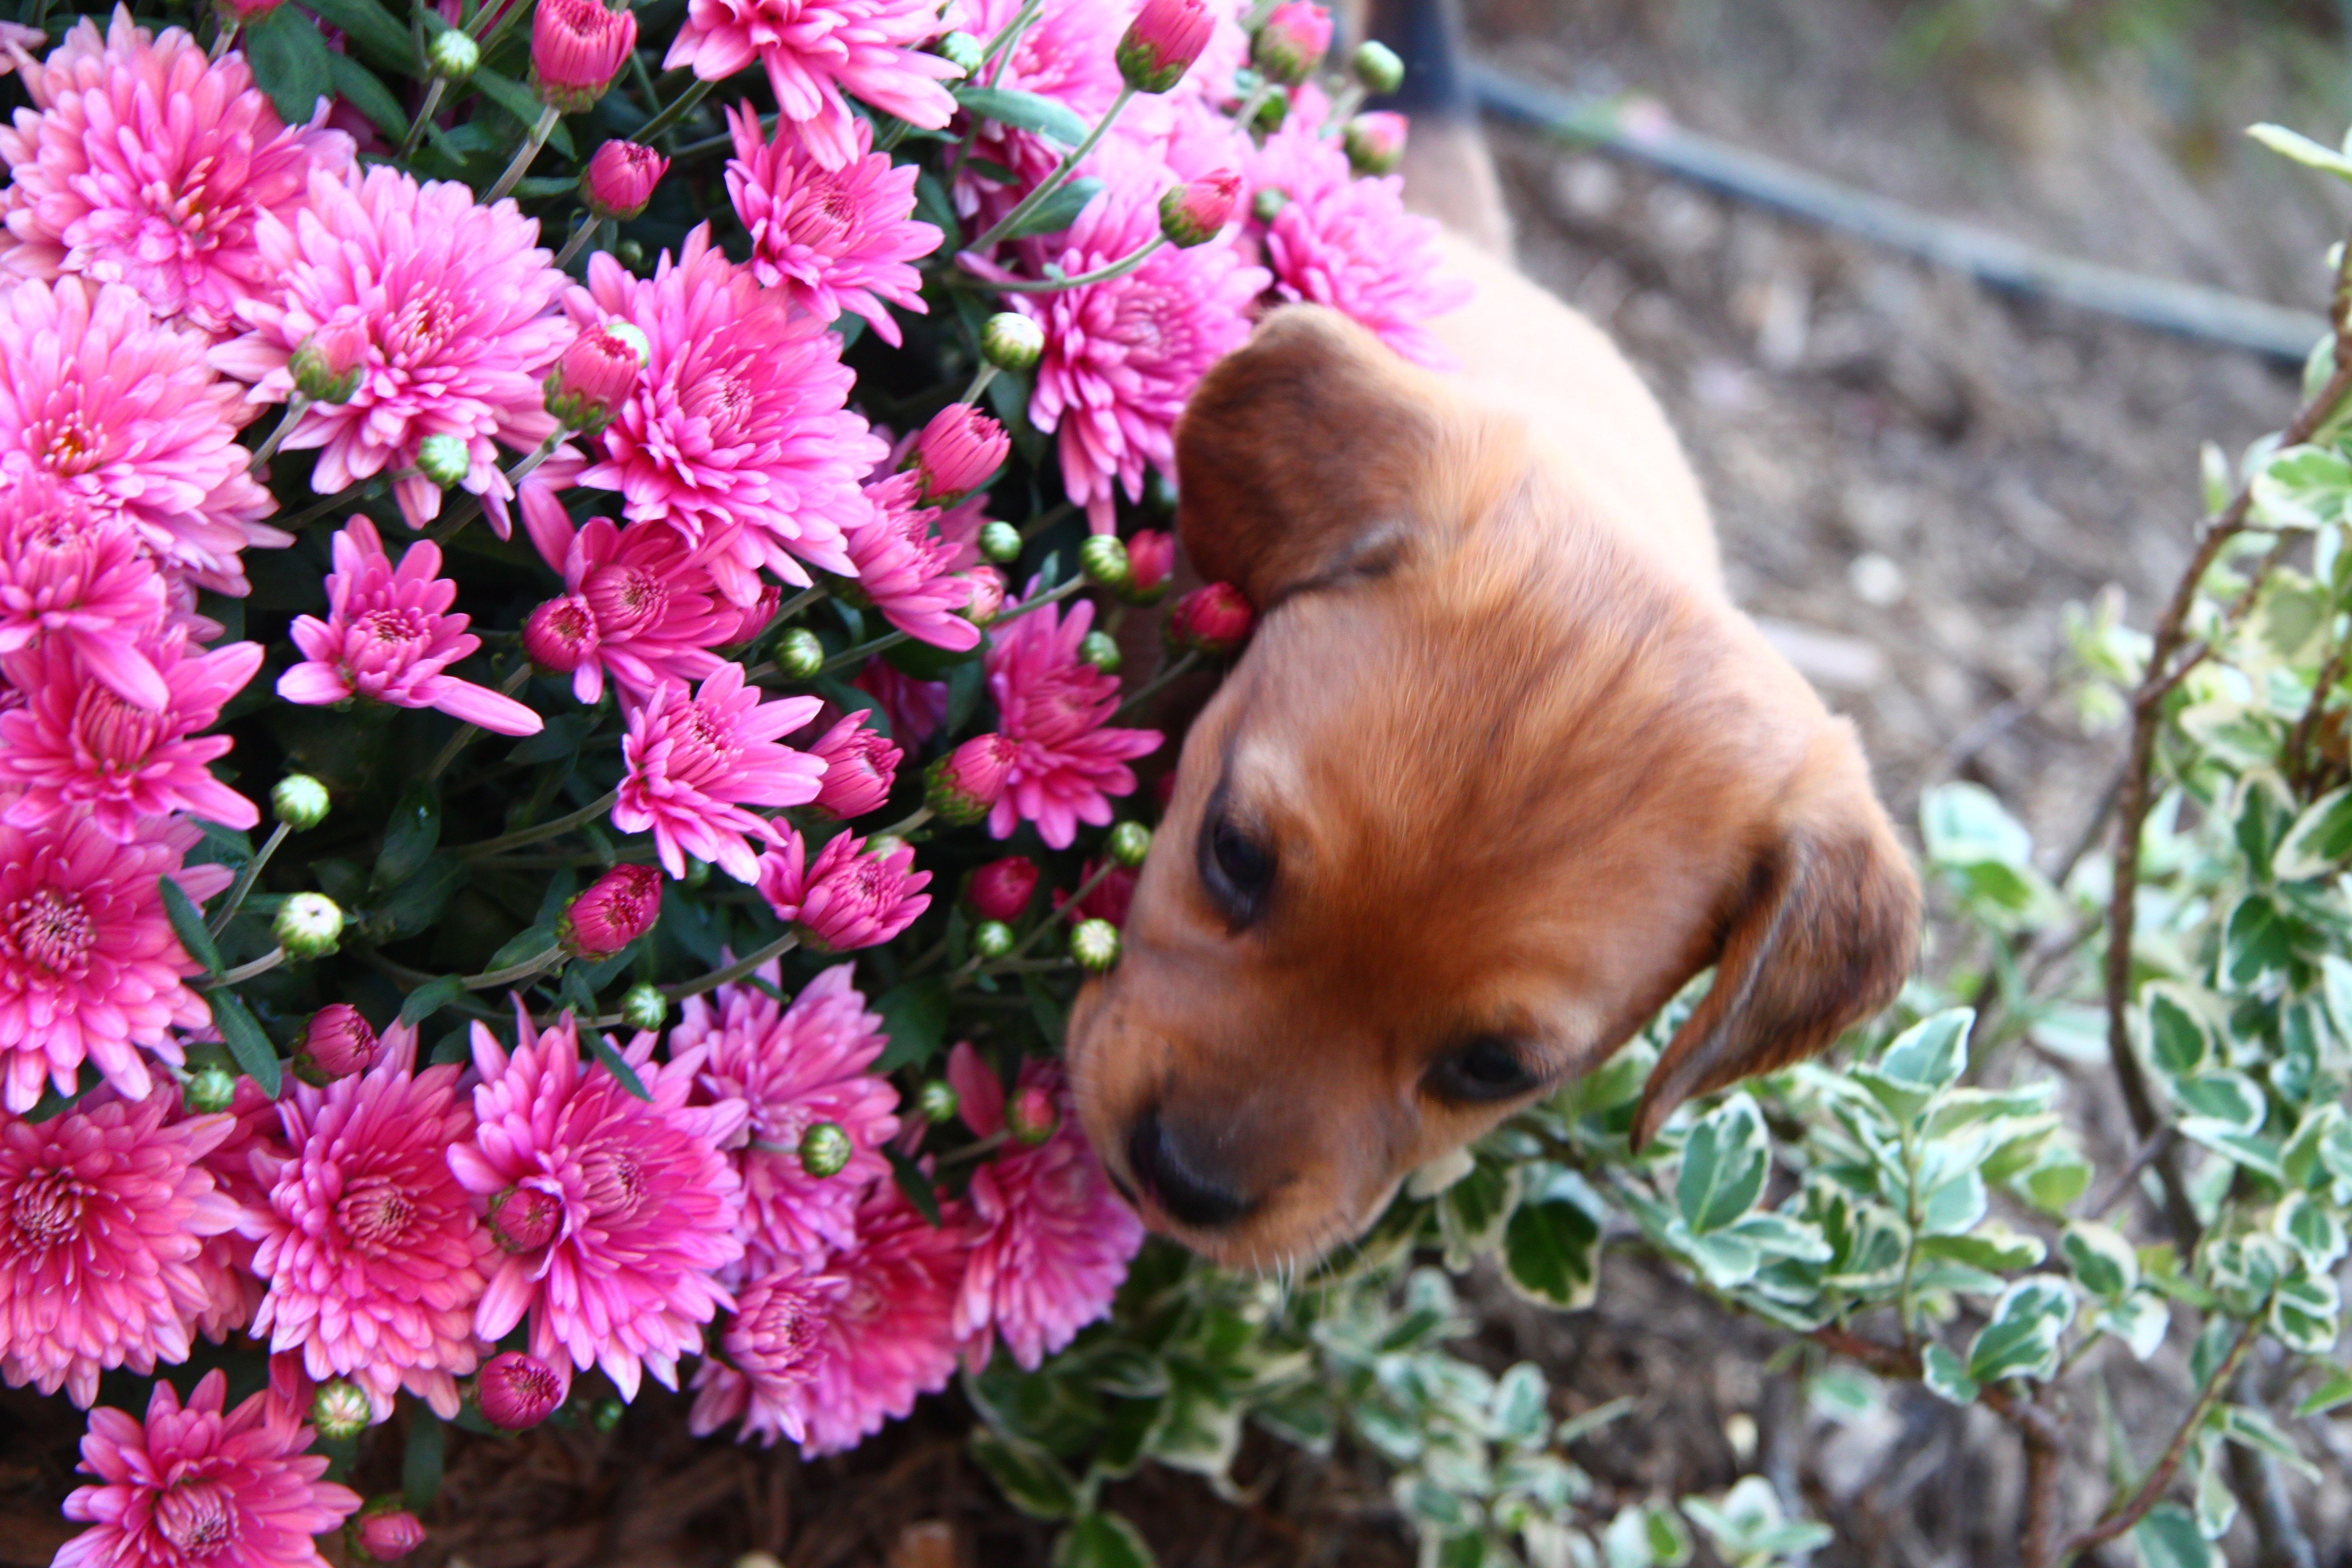 Plants that are harmful for your pets